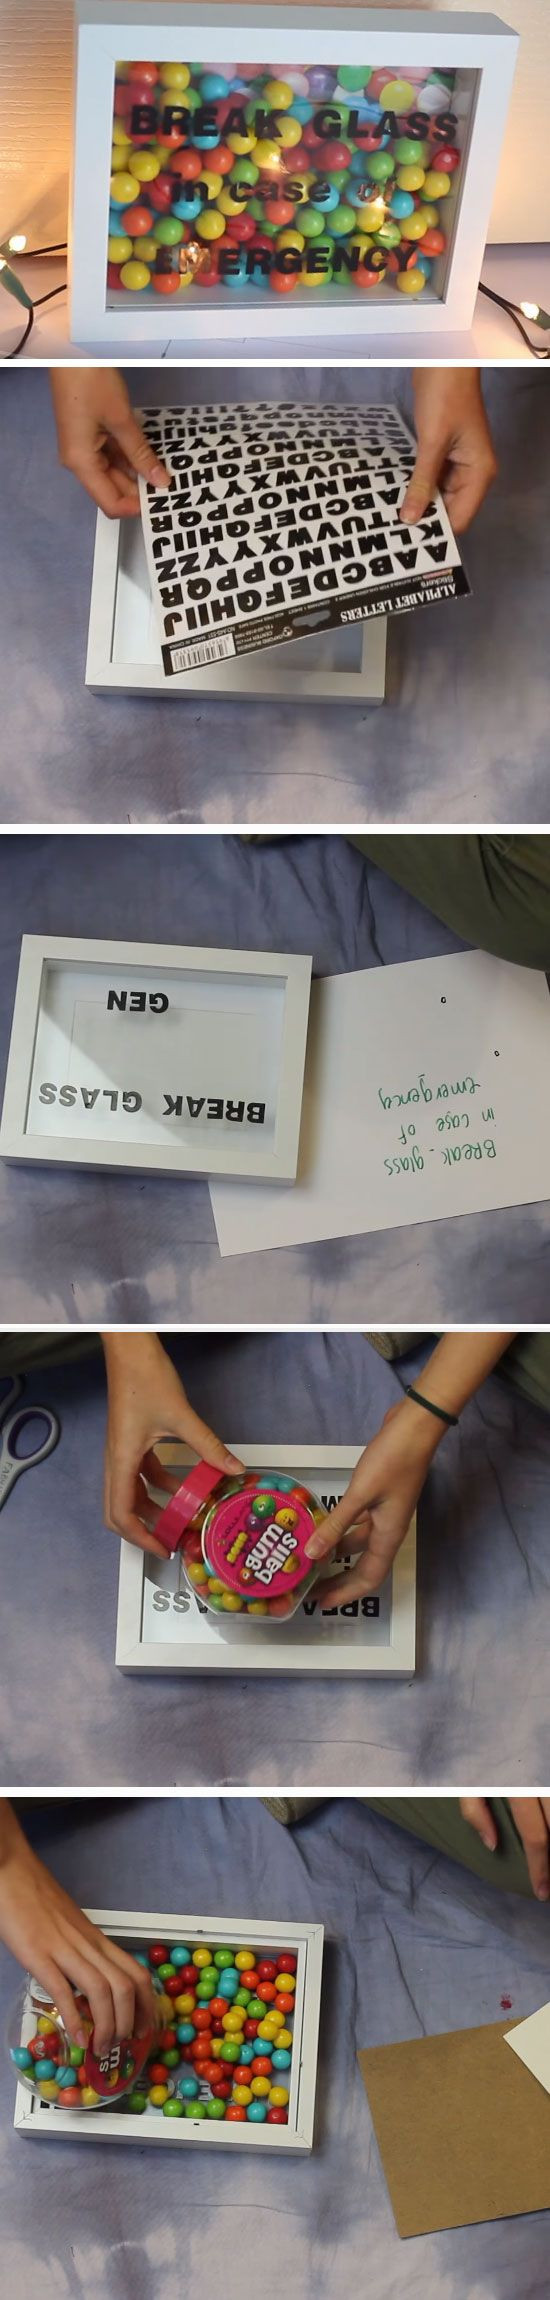 DIY Gifts For Dad From Daughter
 Best 25 Dad birthday ts ideas on Pinterest